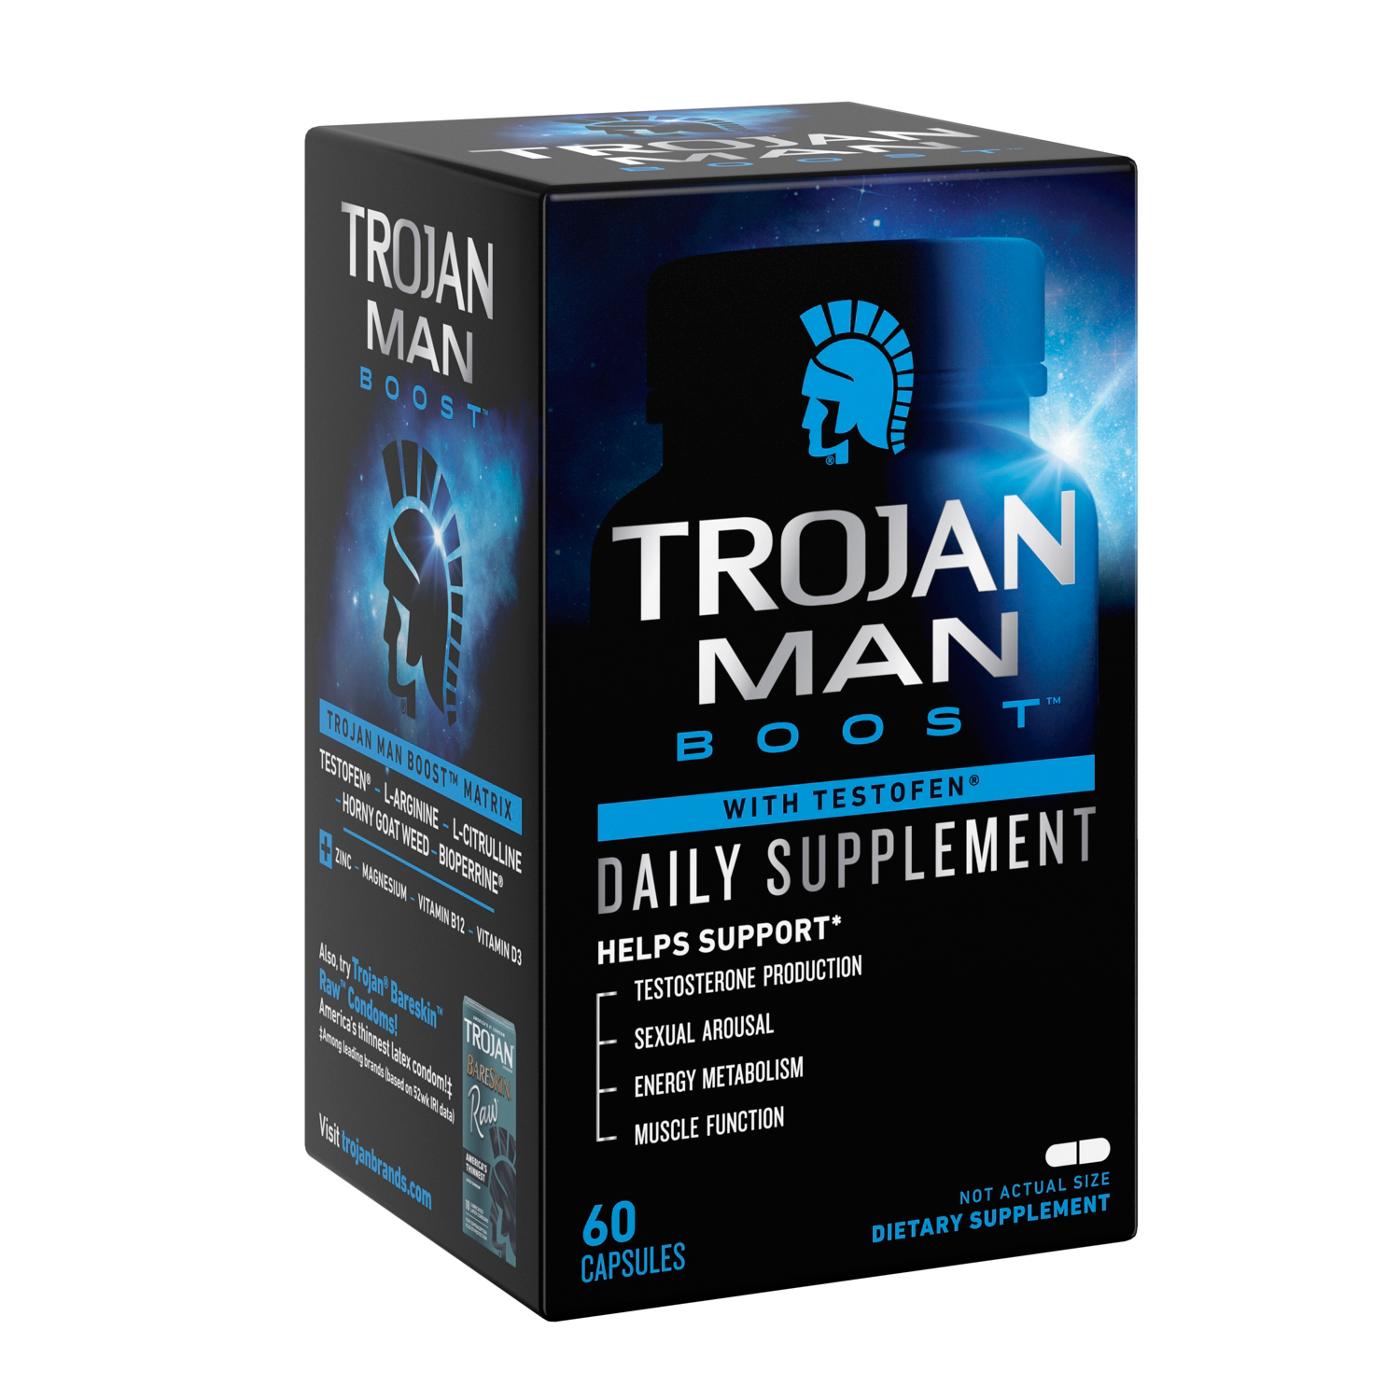 Trojan Man Boost Daily Supplement Capsules; image 5 of 5